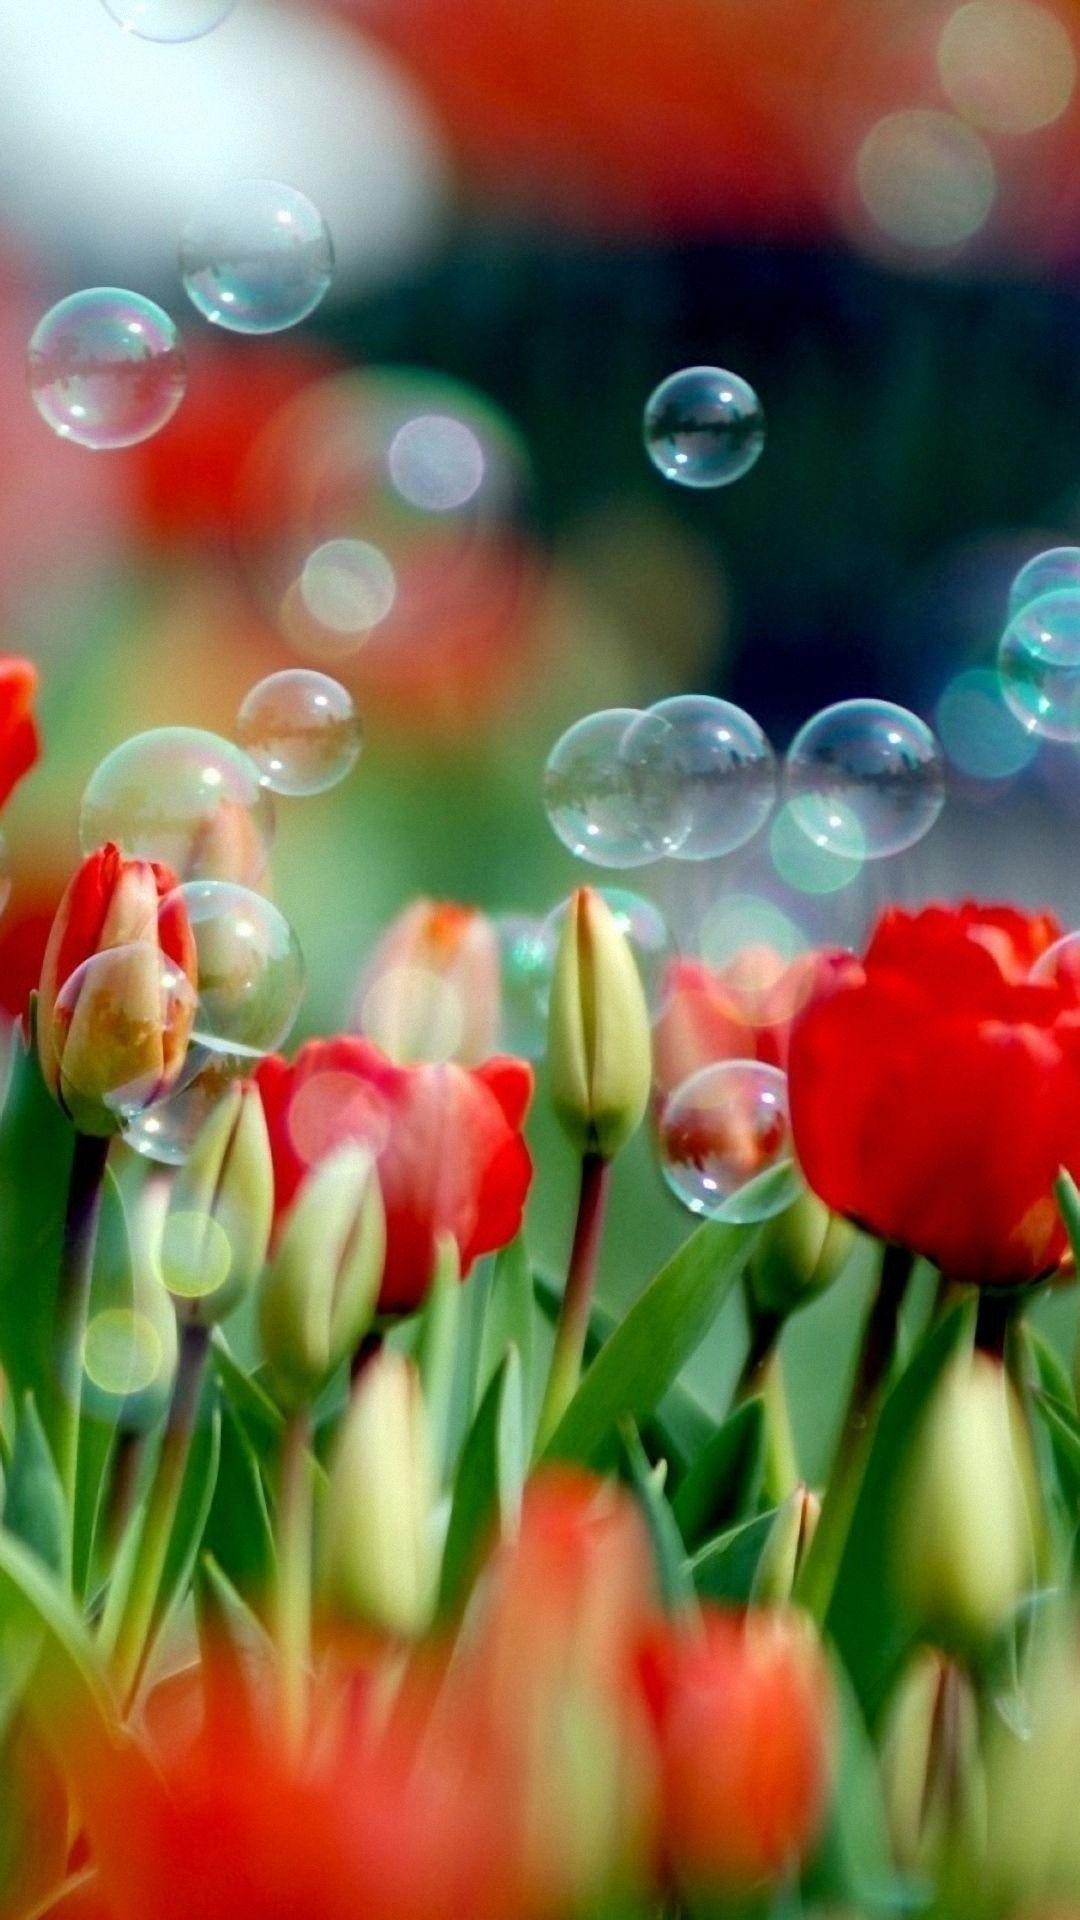 Tulips And Bubbles samsung galaxy a7 Wallpaper HD 1080x1920